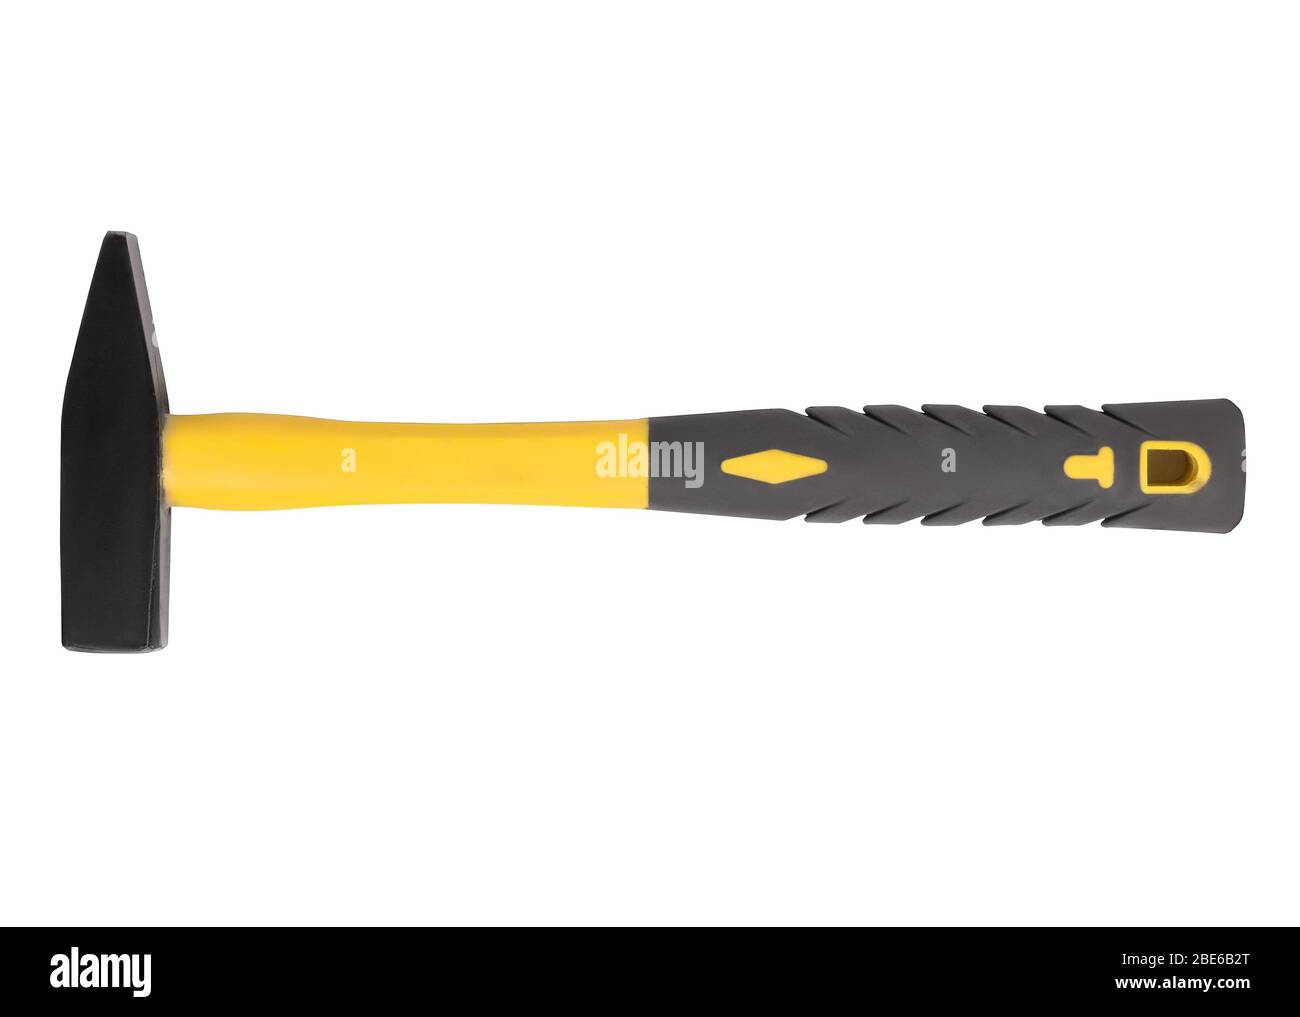 Claw hammer with yellow handle isolated on white background Stock Photo